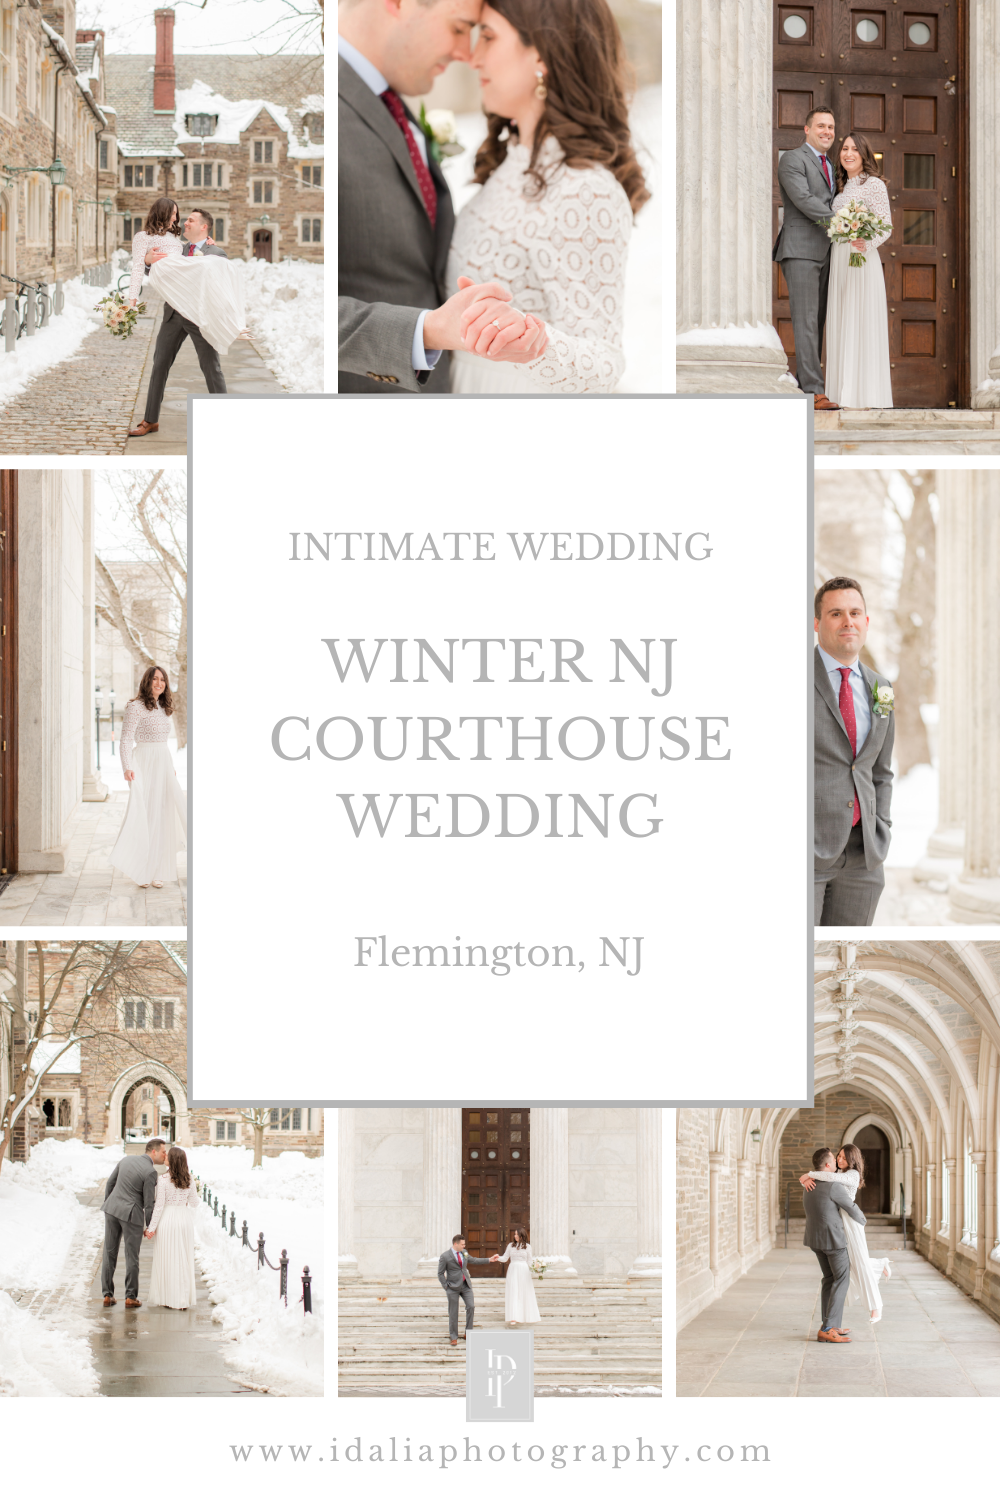 Winter courthouse wedding in New Jersey